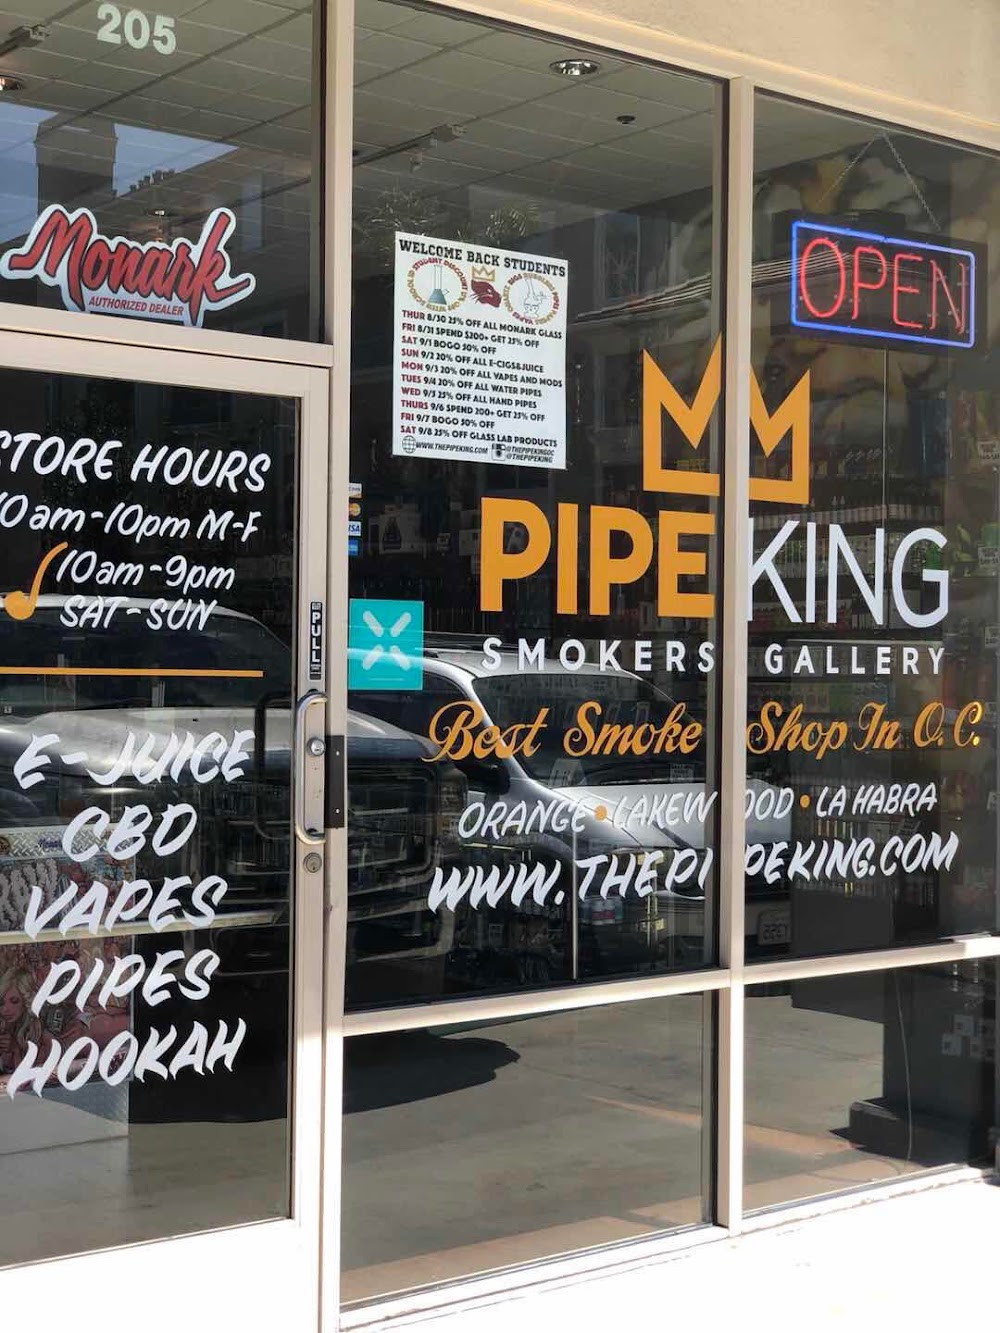 The Pipe King @ South Main